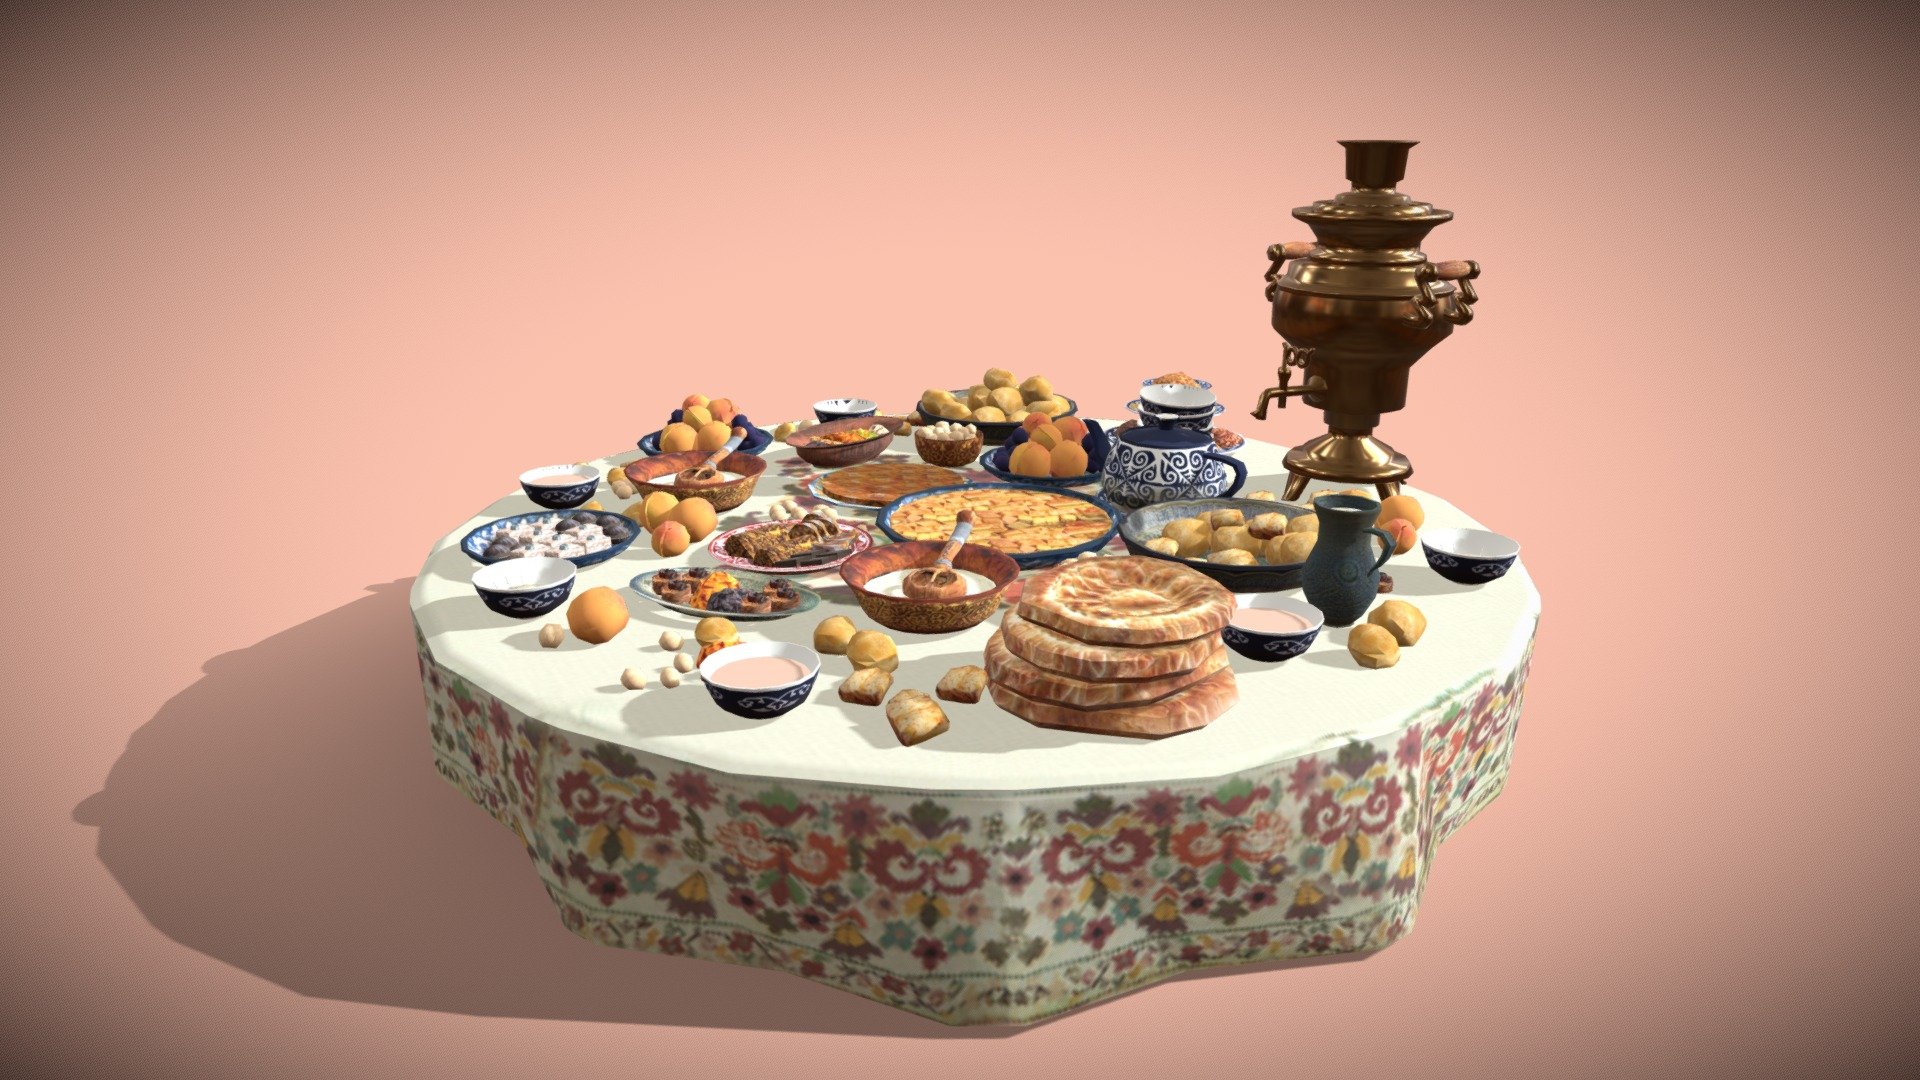 Table served for celebration.

Dastarkhan 2 - Low Poly Game Ready

Optimized for games (game ready), Suitable for close-UPS, illustrations and various renderings 3d model